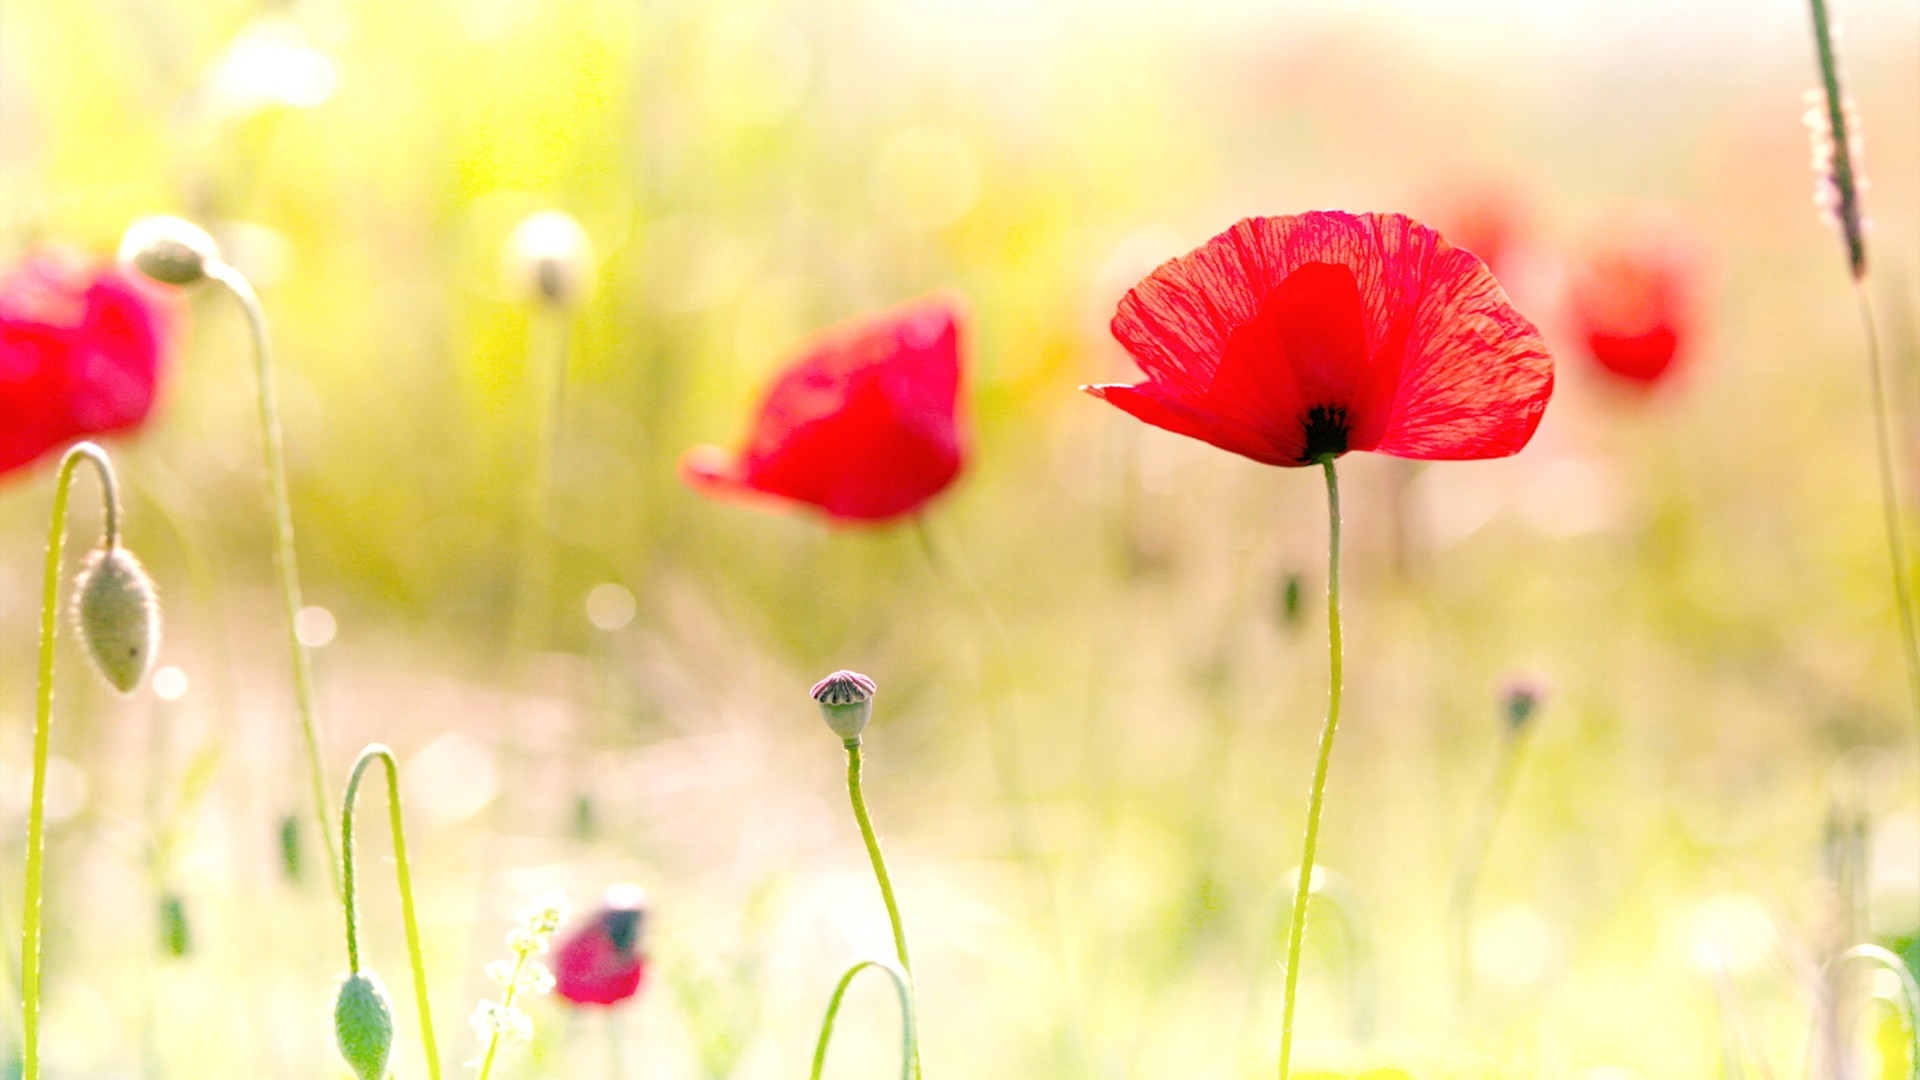 General 1920x1080 flowers poppies red flowers plants bright